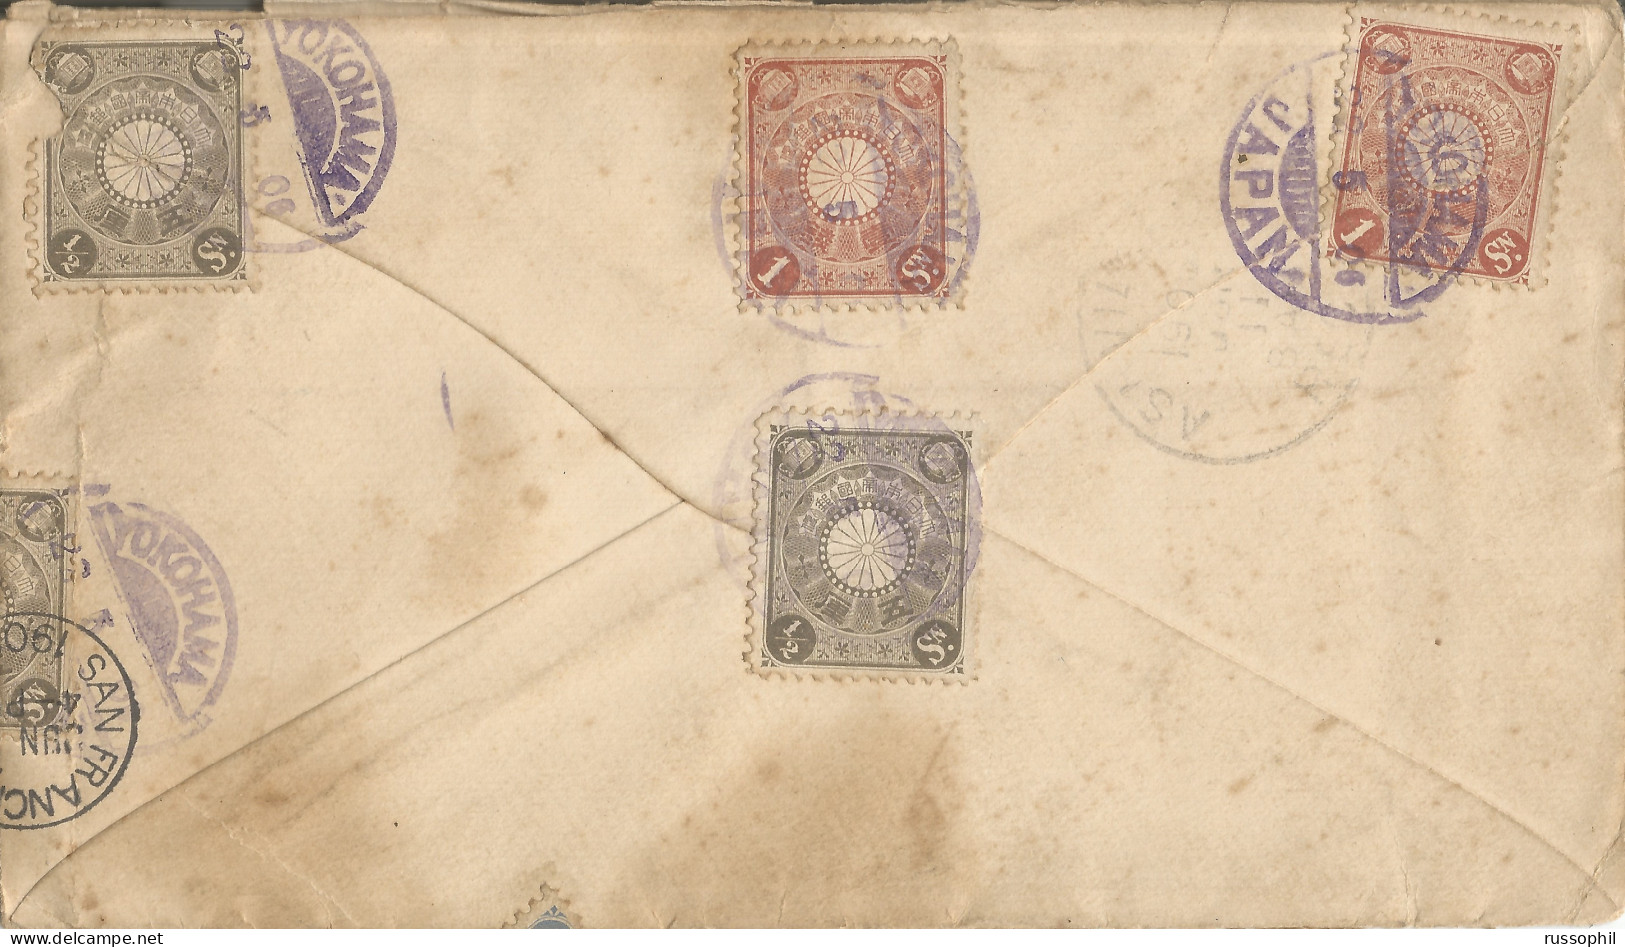 JAPAN - SPECTACULAR 20 SEN 21 STAMP FOUR COLOUR FRANKING ON COVER FROM YOKOHAMA TO THE US - 1906 - Covers & Documents